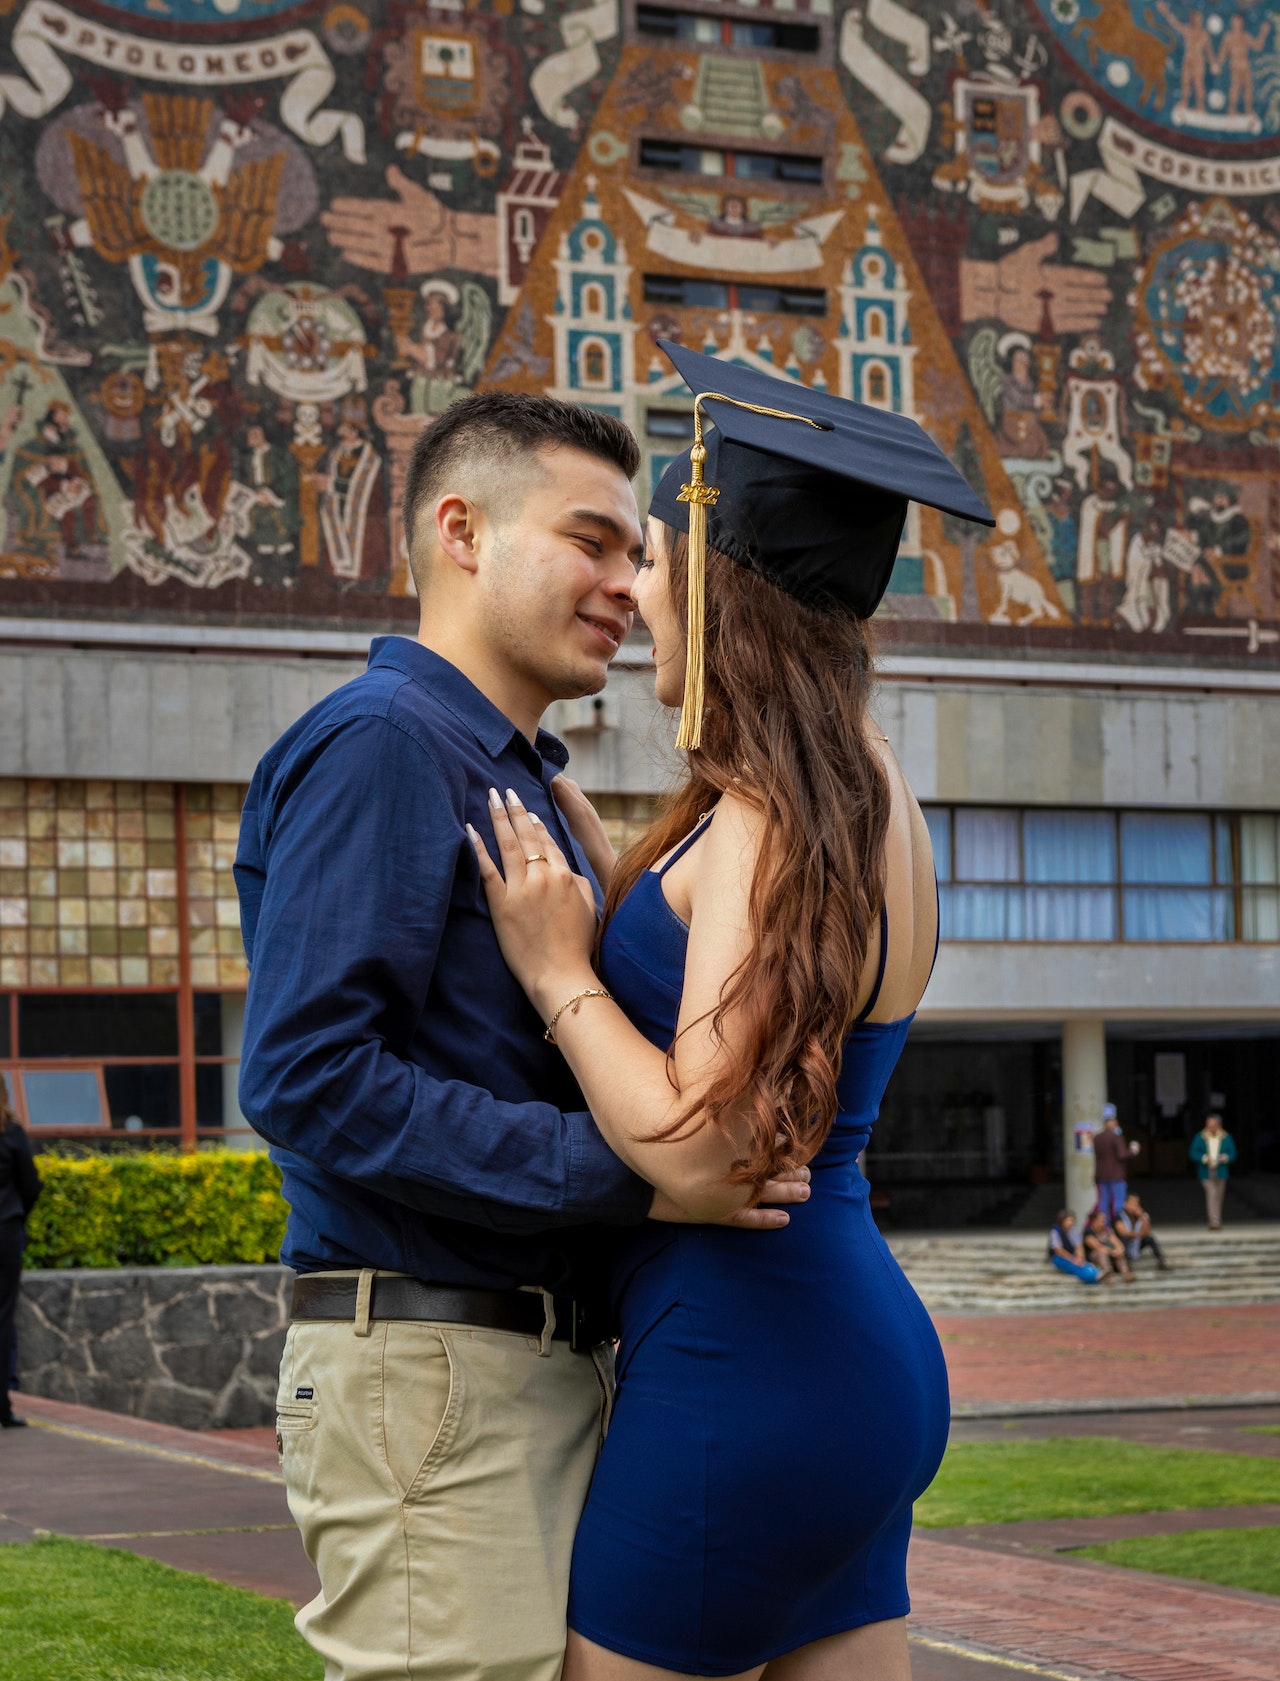 Kissing with the University as background